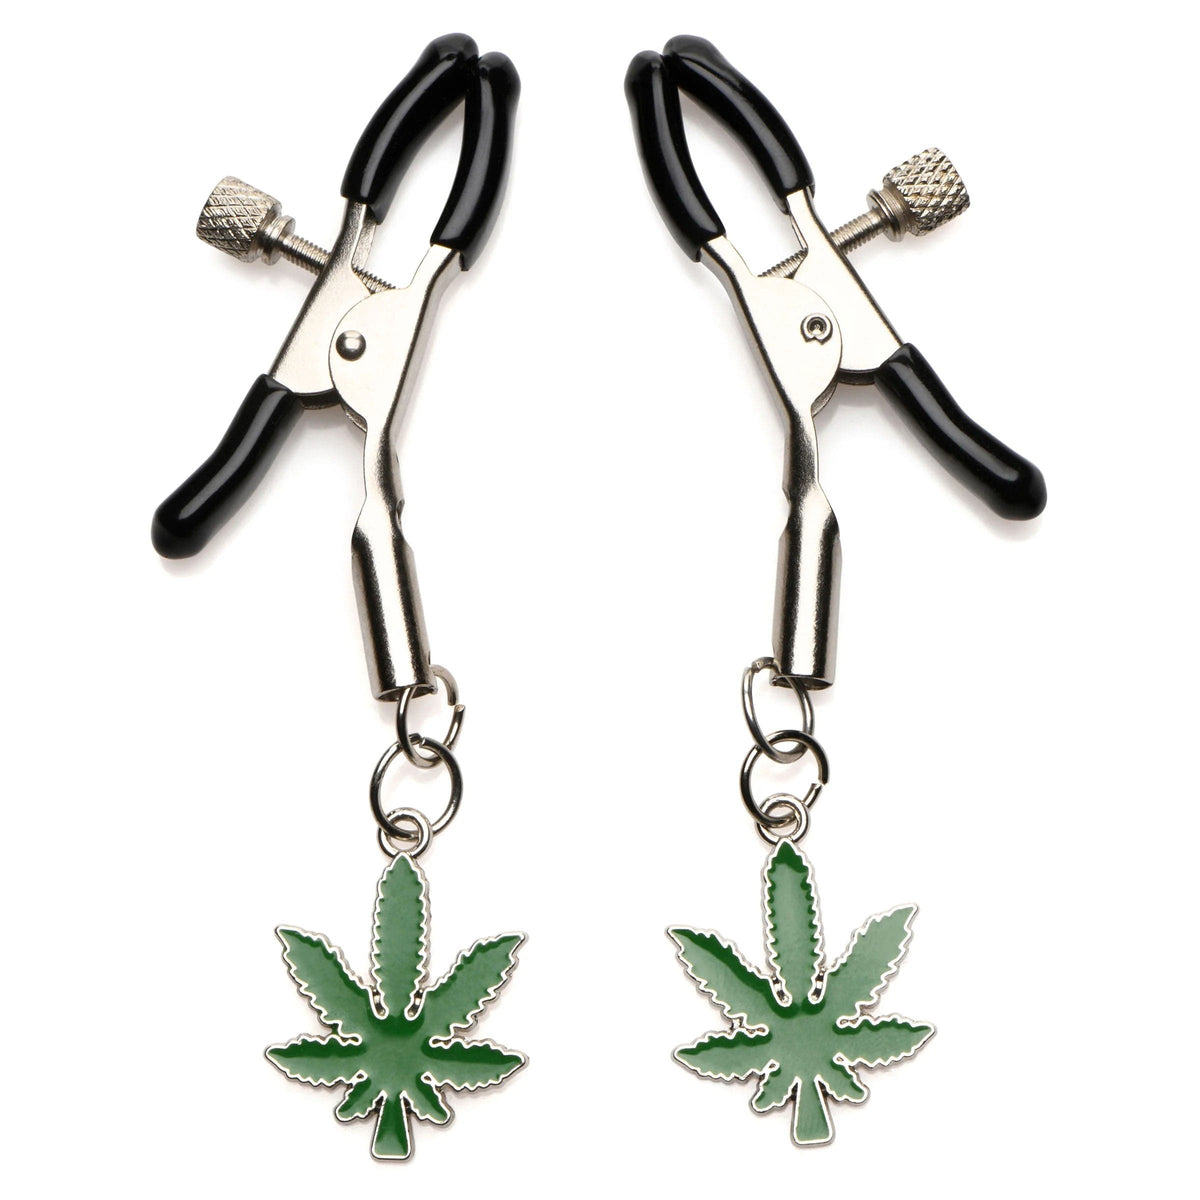 mary jane nipple clamps green